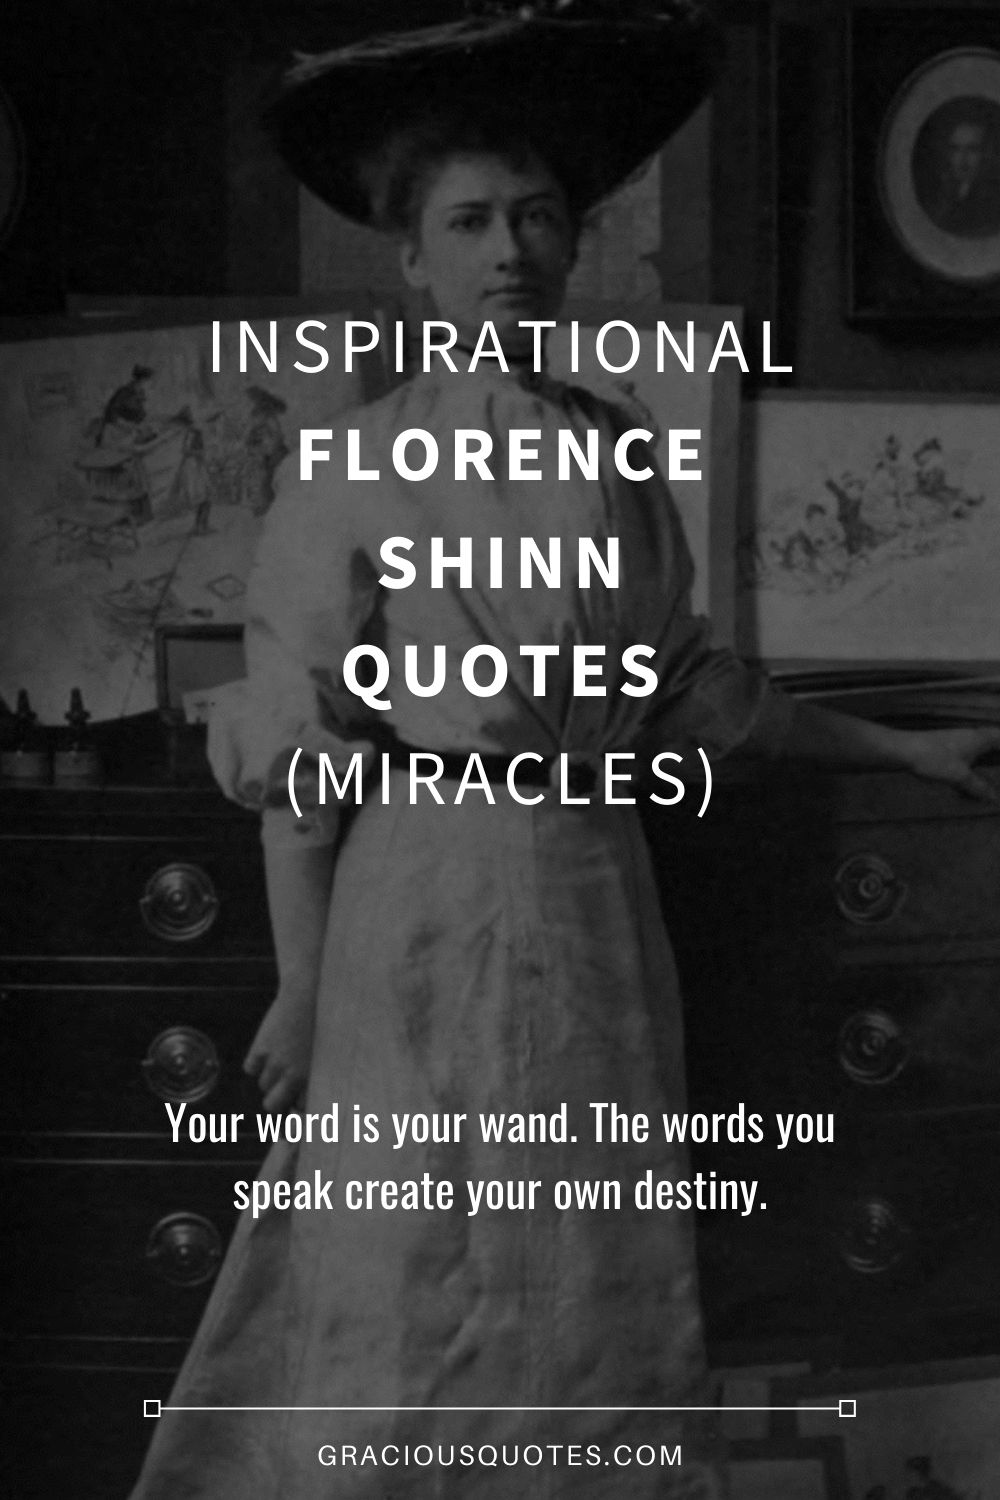 Inspirational Florence Shinn Quotes (MIRACLES) - Gracious Quotes